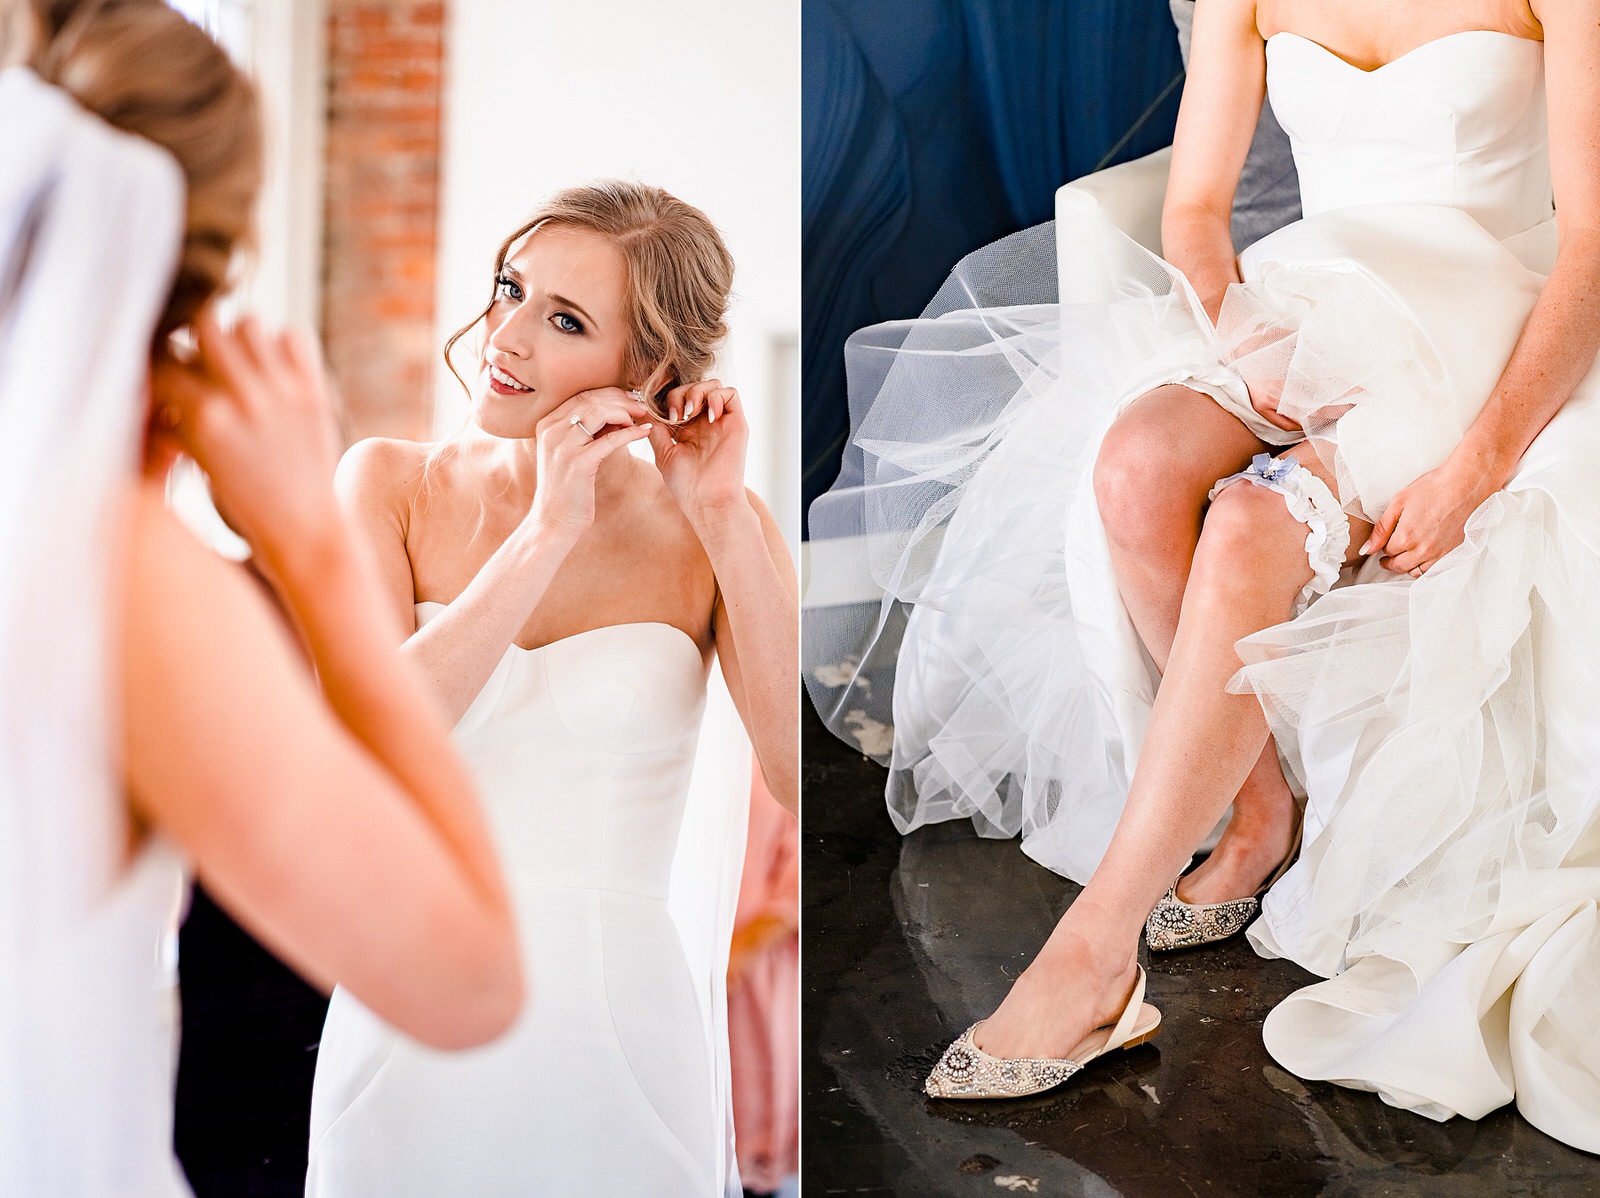 gorgeous brides puts on her finishing touches of earrings and garter